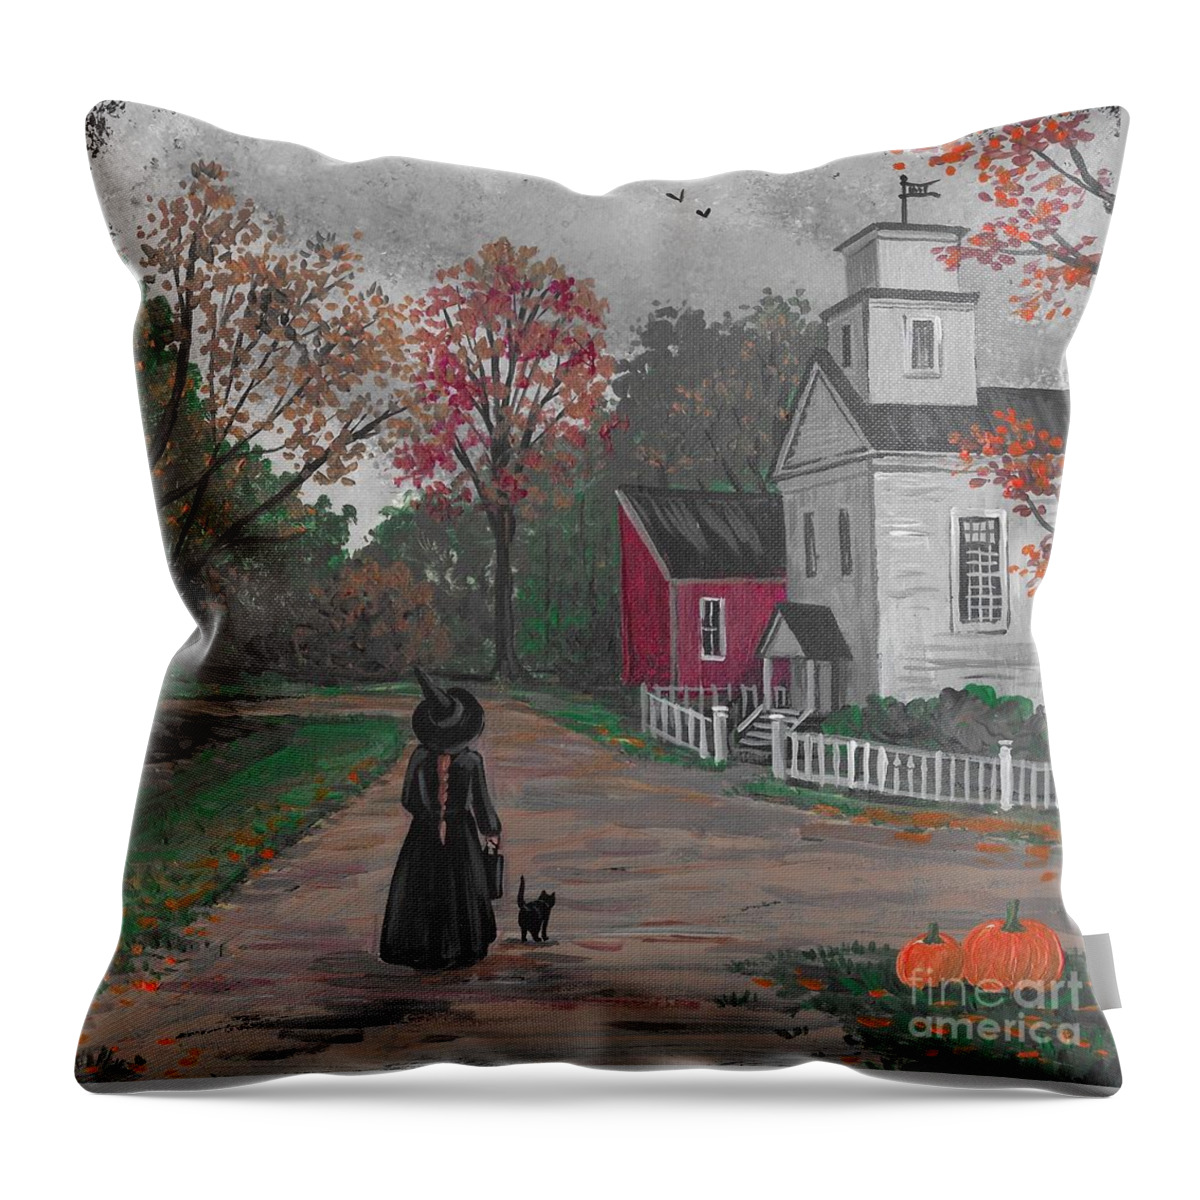 Print Throw Pillow featuring the painting Welcome To Sleepy Hollow by Margaryta Yermolayeva